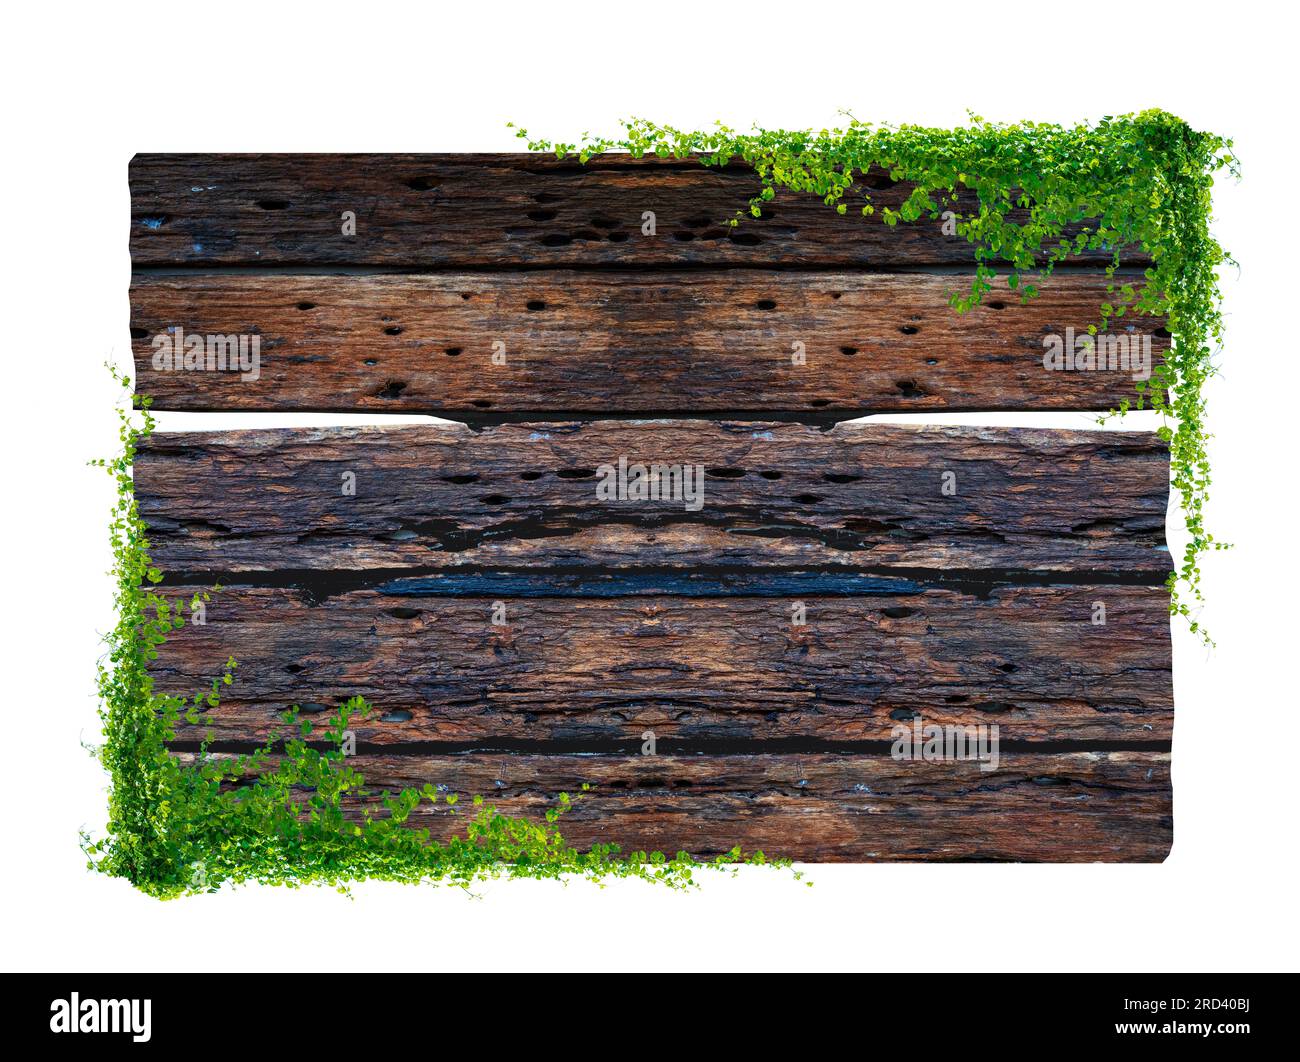 Dark brown antique plank frame background with tropical leaves and climbing vines on the edge of the plank. Stock Photo